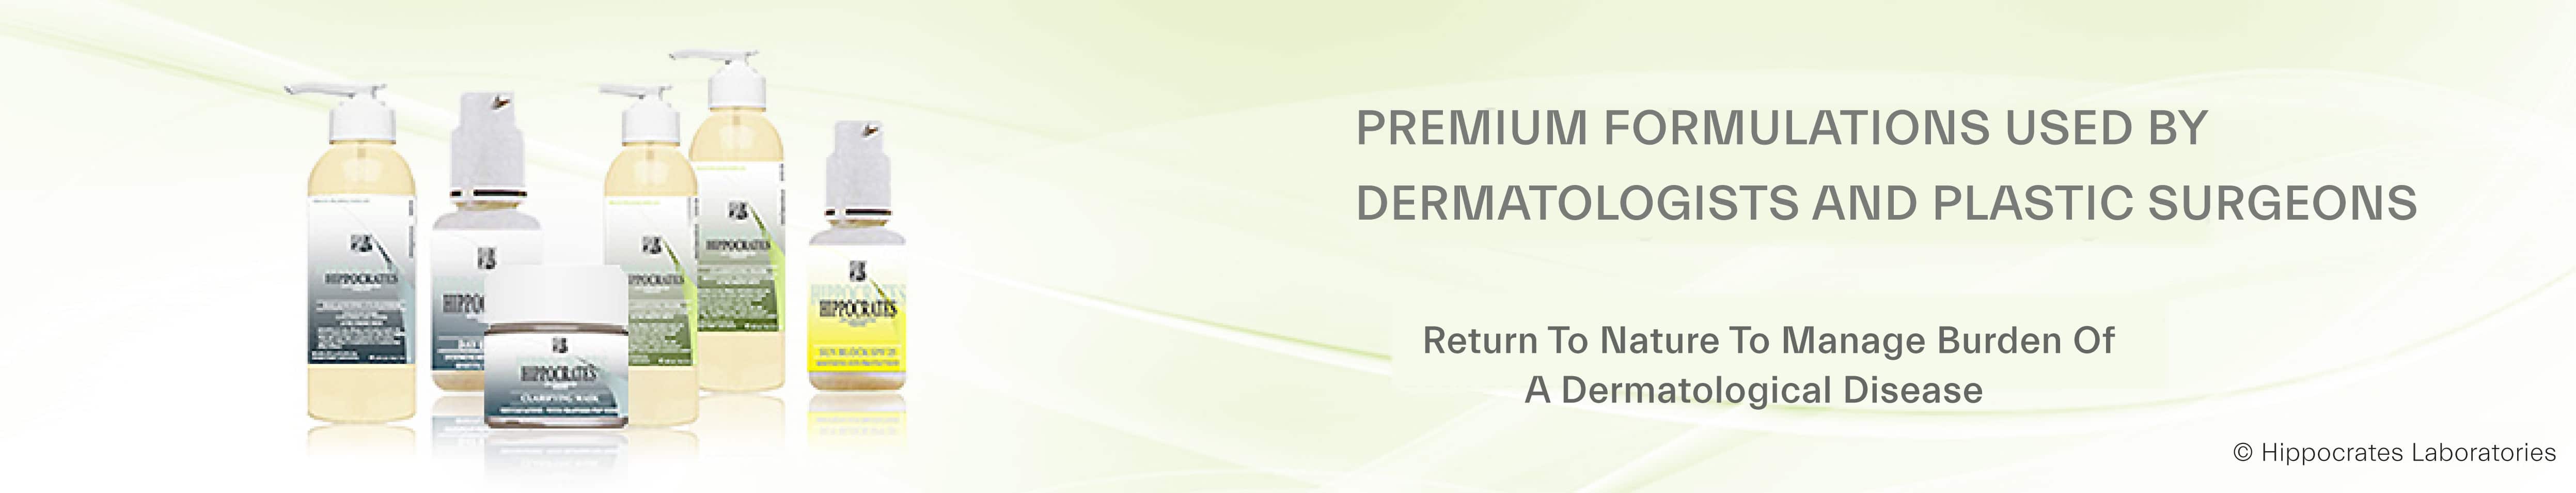 Dermatology anti aging skincare products